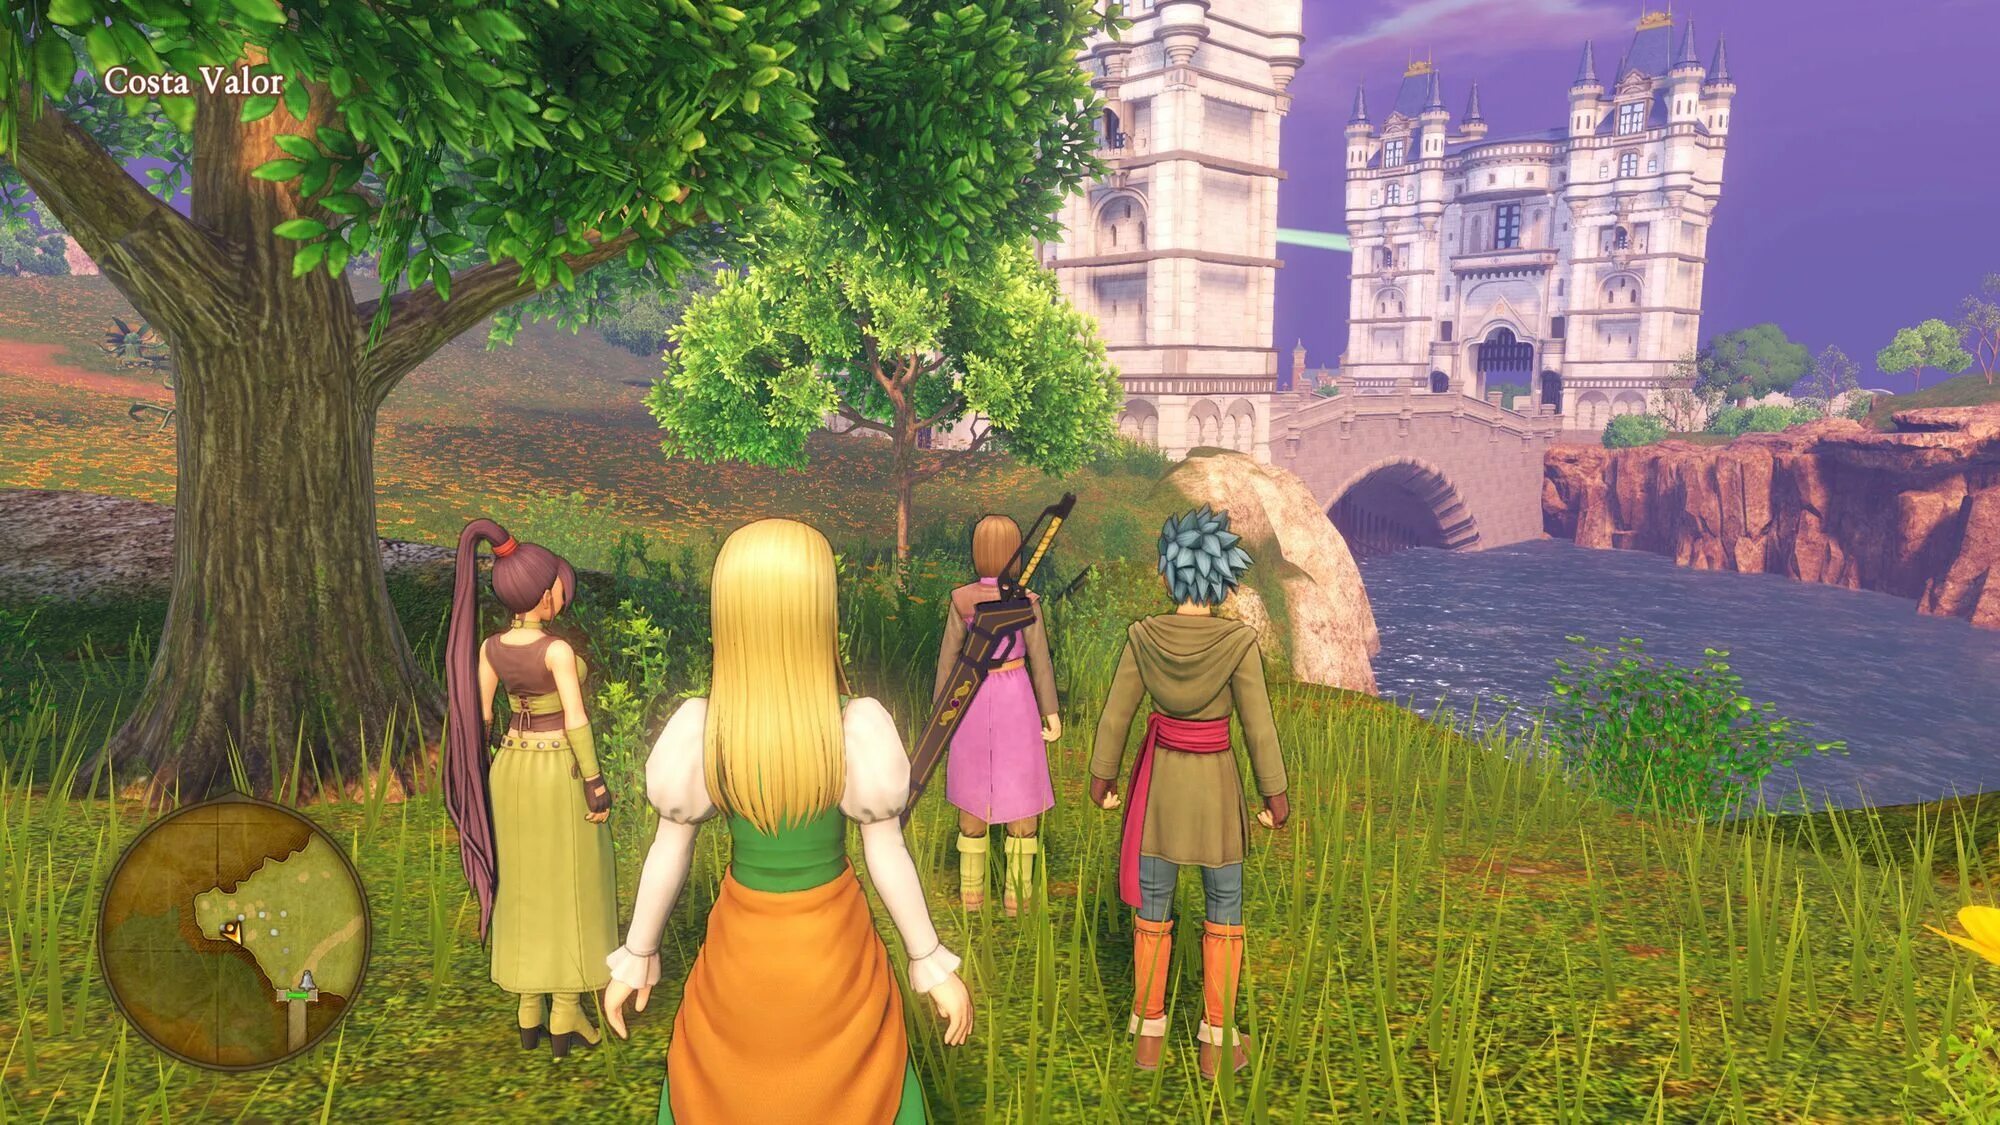 Dragon Quest 11 s. Dragon Quest XI S: Echoes of an elusive age - Definitive Edition. Dragon Quest 11: Echoes of an elusive age. Dragon Quest XI S: Definitive Edition.